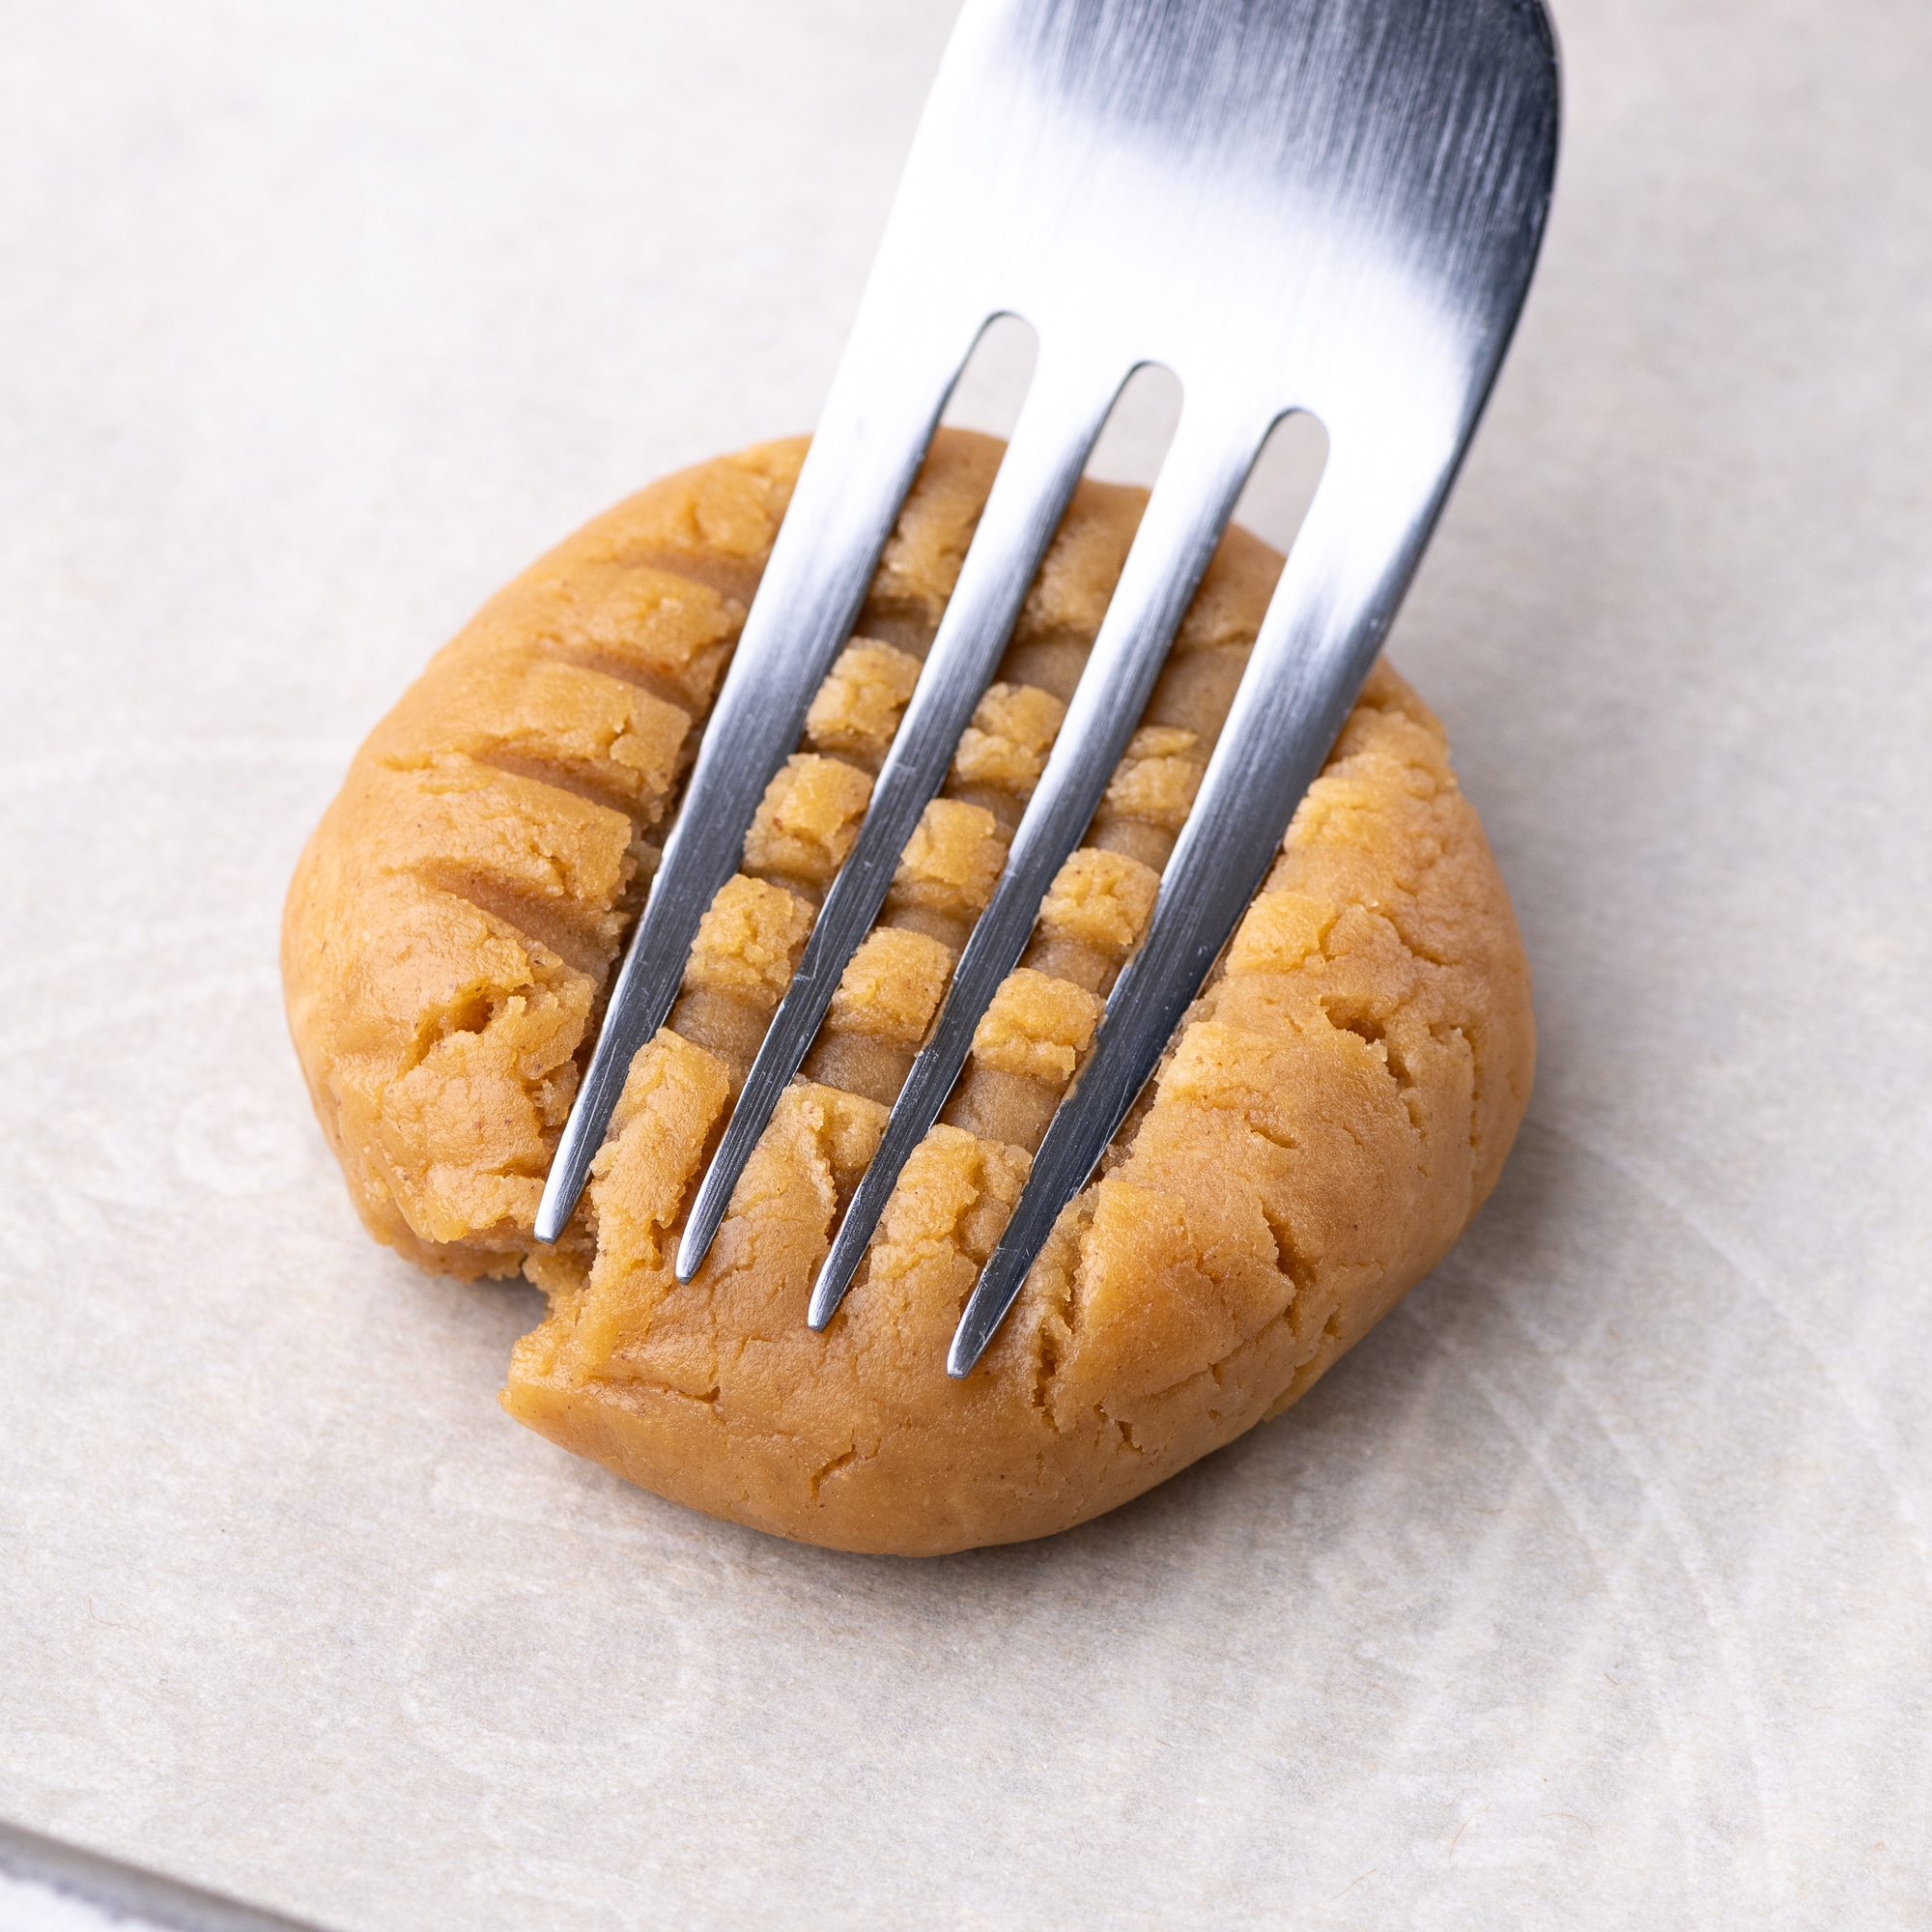 A fork being pressed into a ball of a cookie dough, creating cross hatches in the dough. 